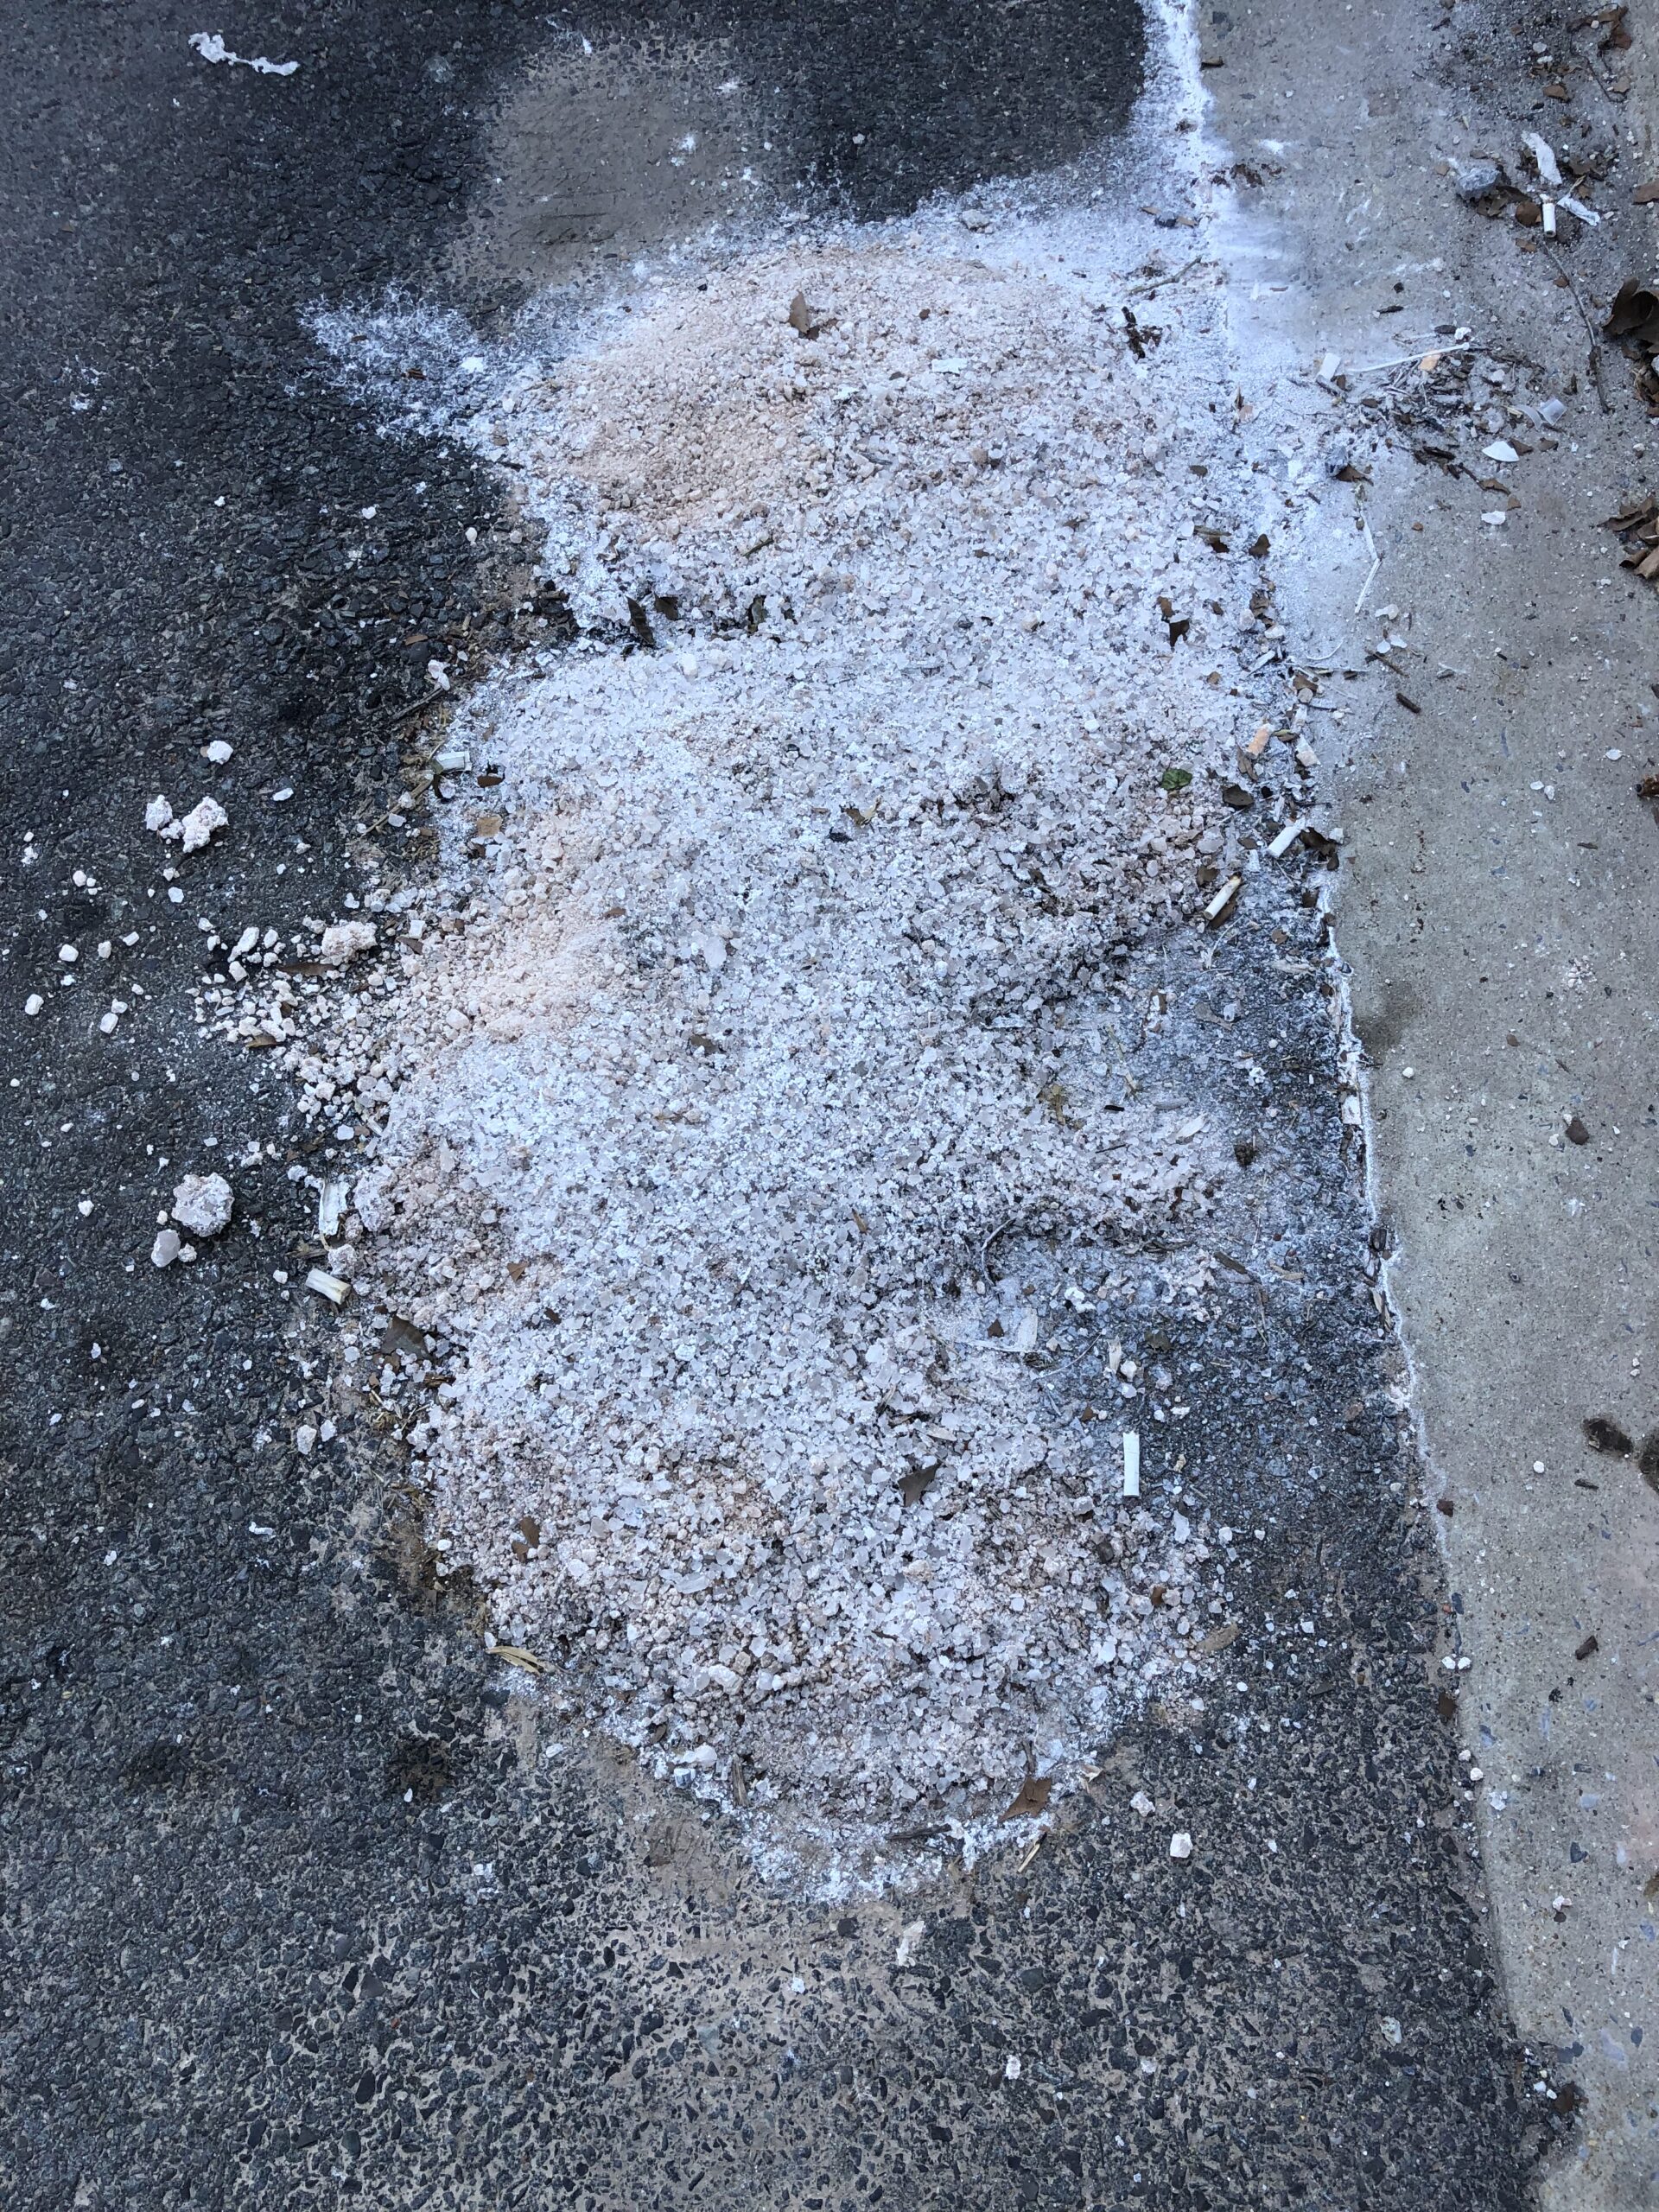 Road salt after winter storm. The salinization from winter road salt combined with other pollutants creates “chemical cocktails” that can jeopardize the ecological balance of waterways. Credit: Sujay Kaushal.